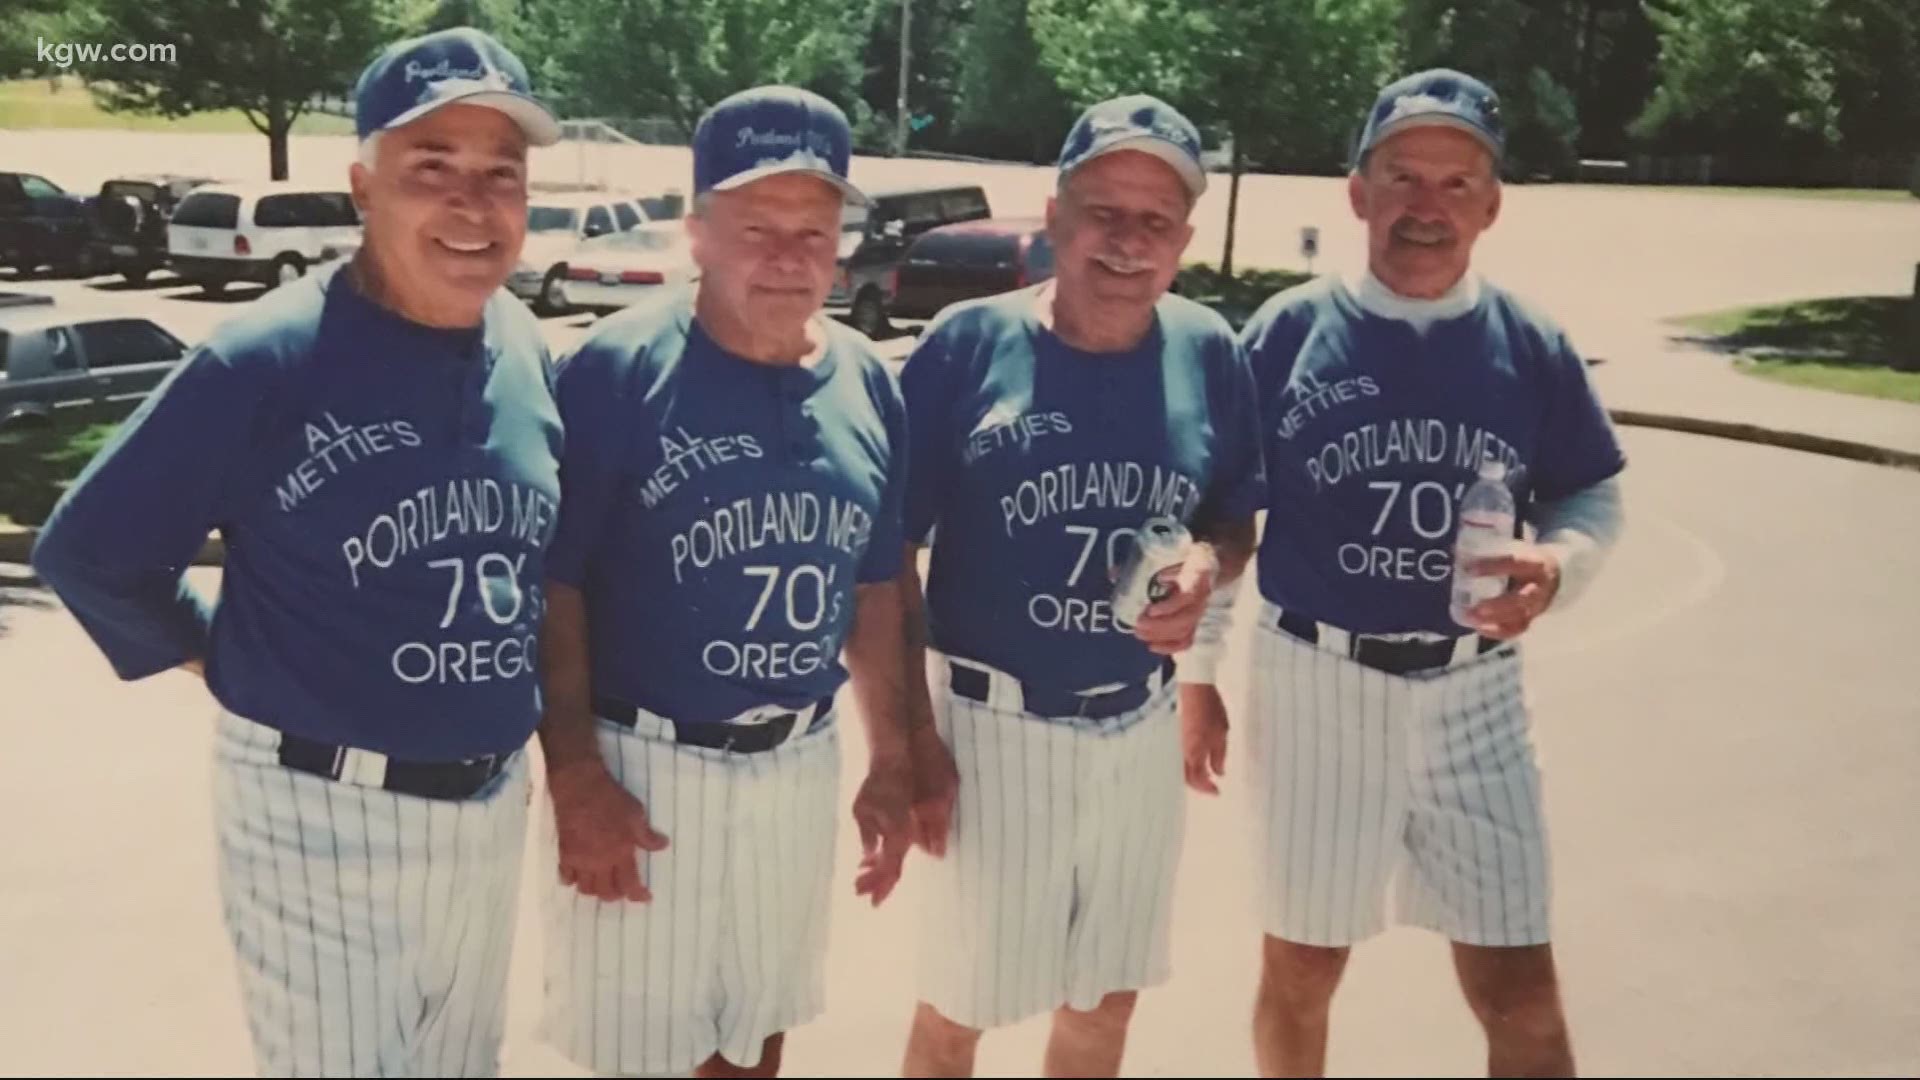 Carlo "Mouse" Fazzolari was a fixture among the softball community in Portland.